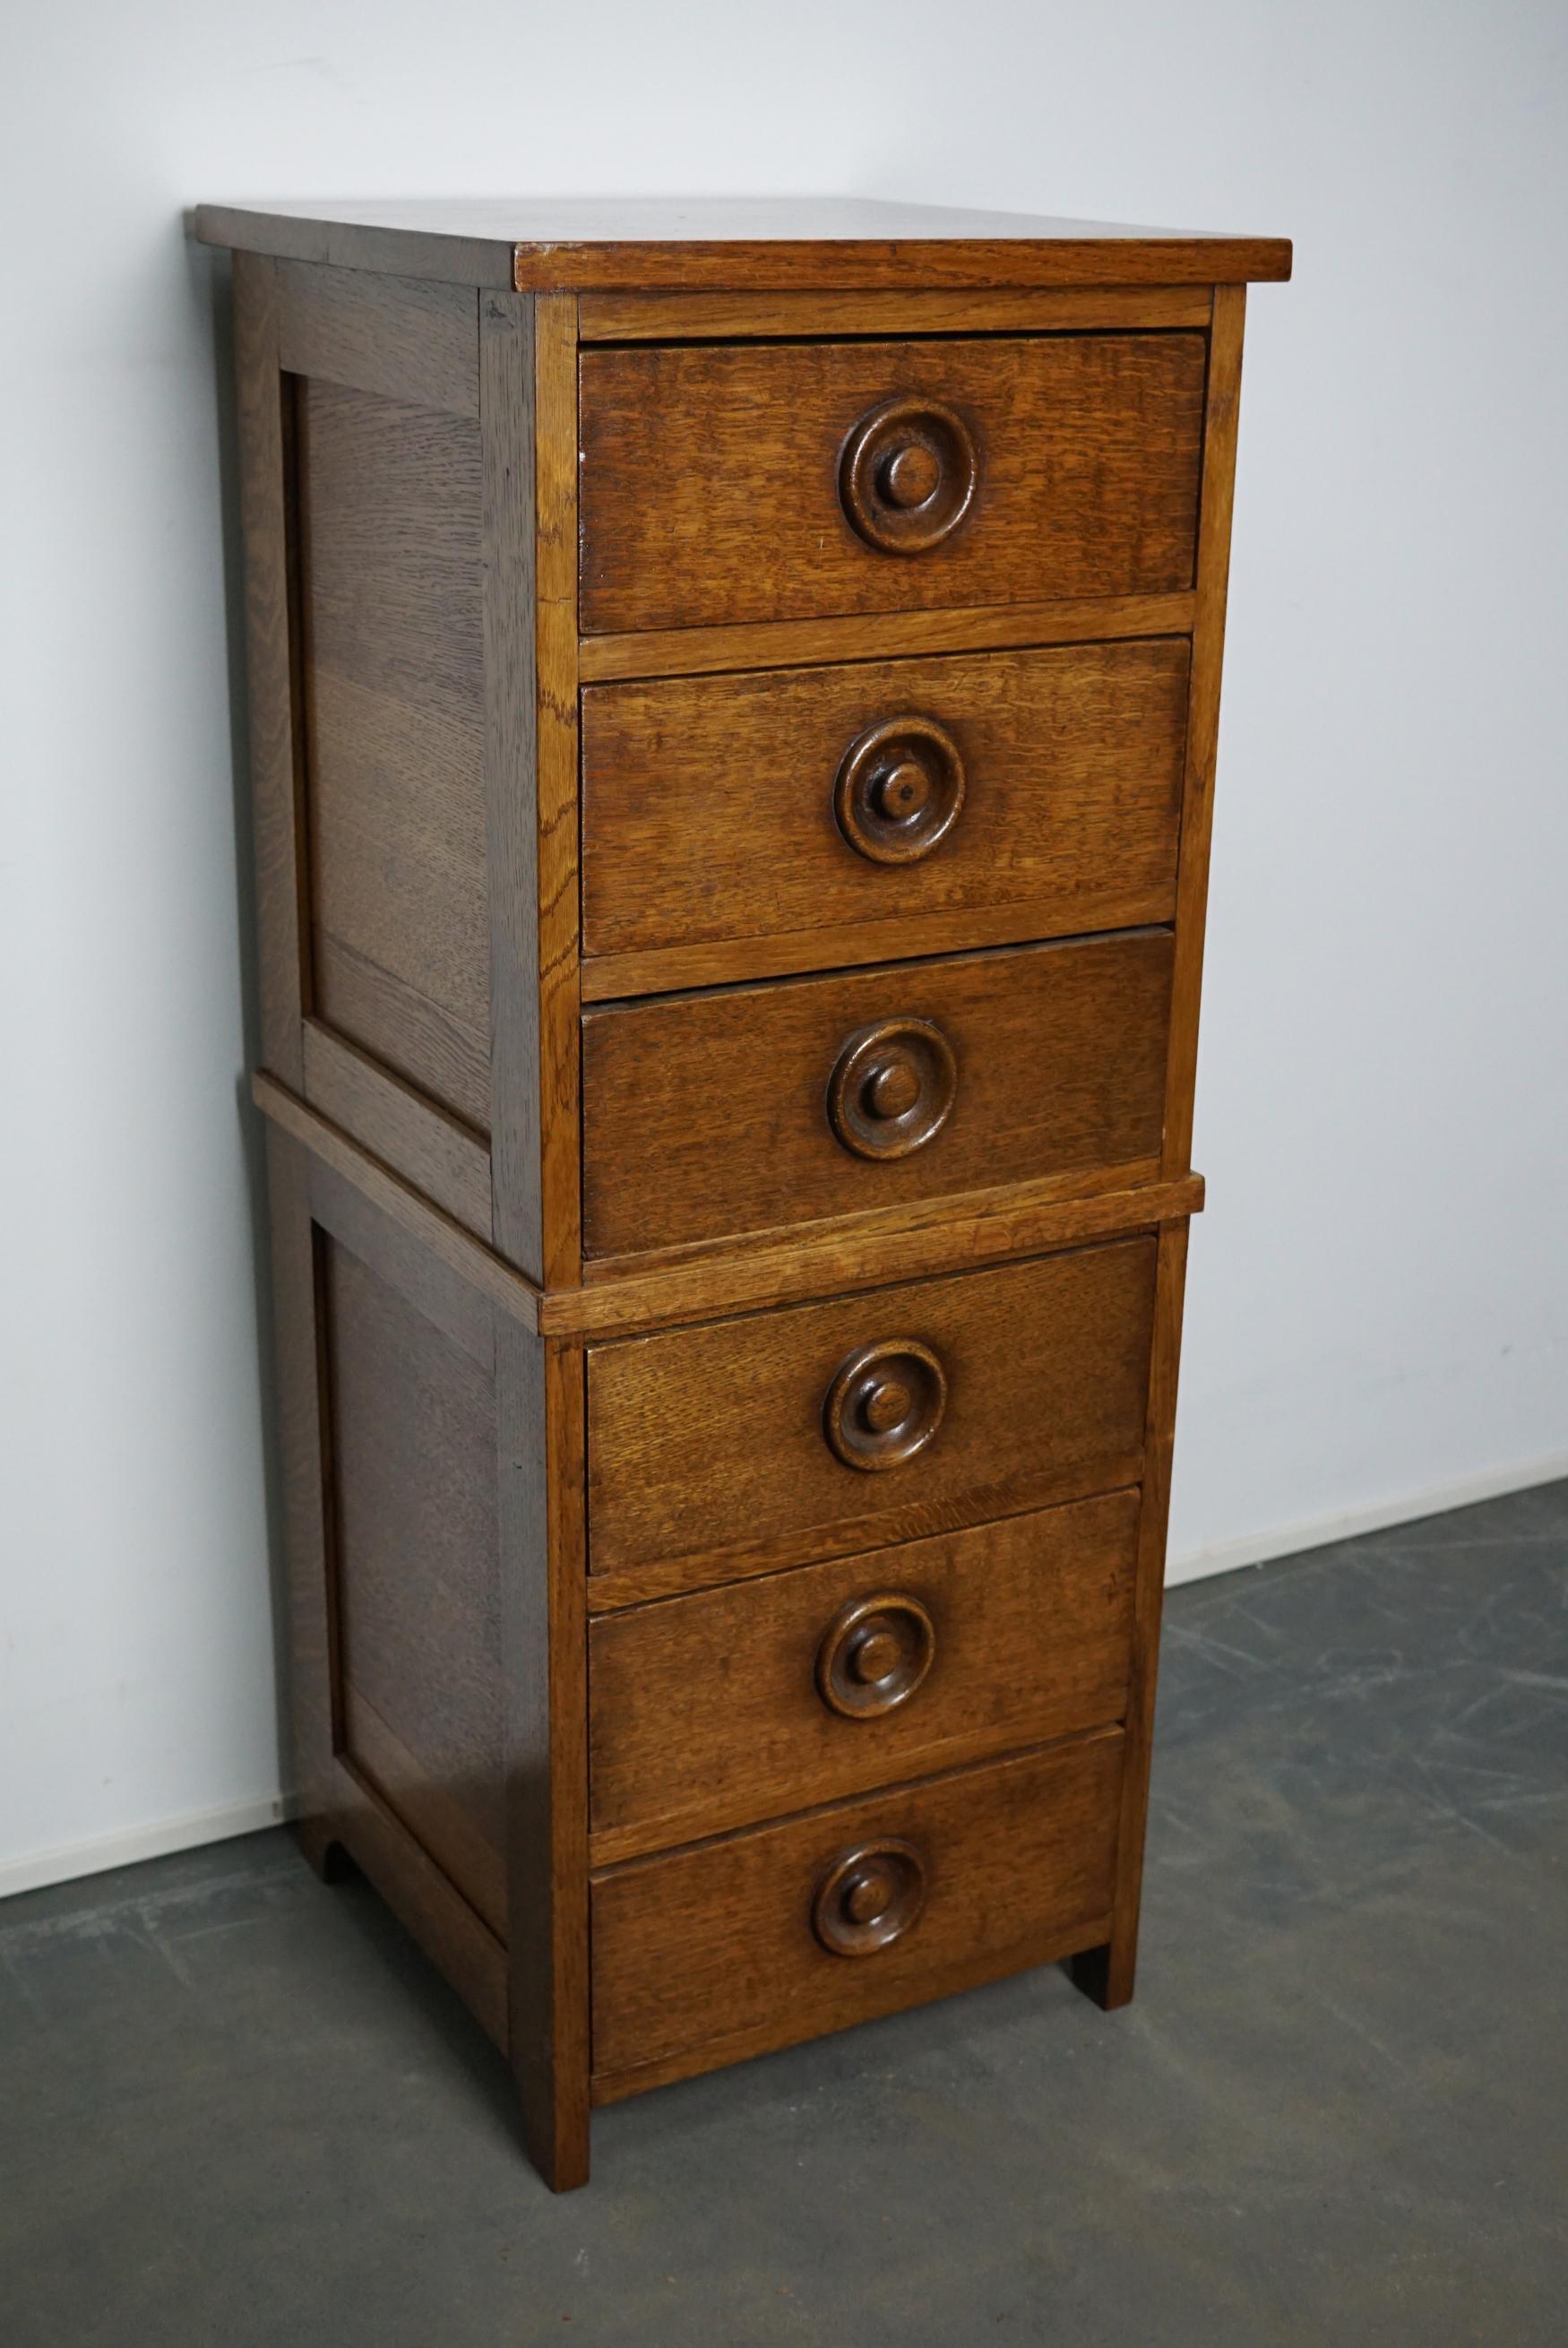 This apothecary cabinet was made circa 1930s in England. It features 6 drawers with nice handles. It is made from oak and it remains in a very good condition. The interior dimensions of the drawers are: D 36 x W 32.5 x H 12 cm.
  